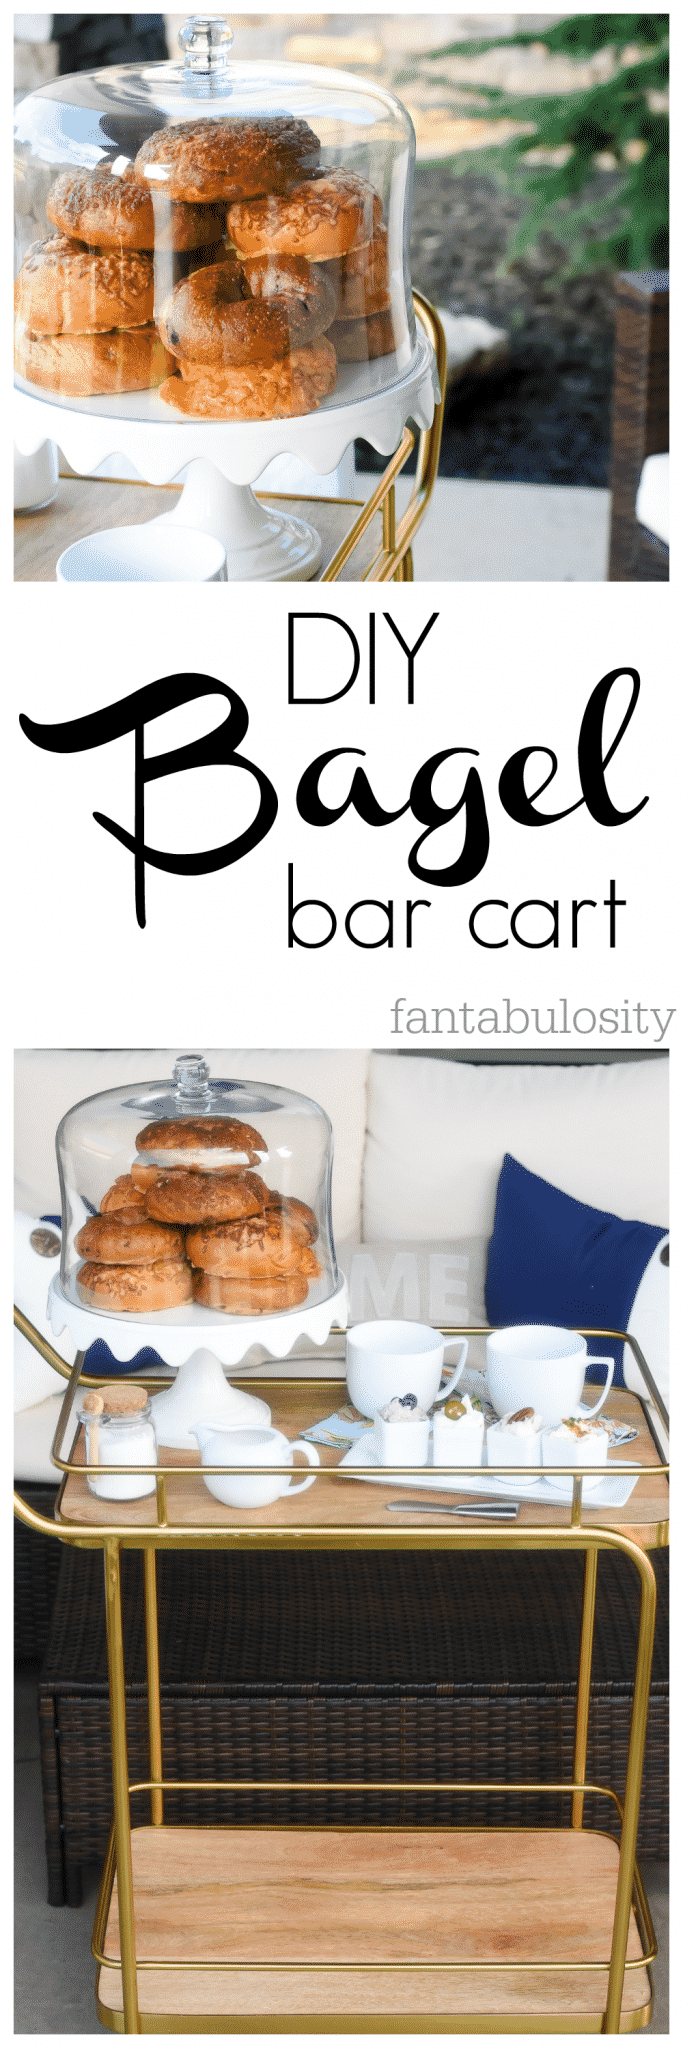 DIY Bagel Bar Cart Ideas. This is perfect for when we have houseguests!